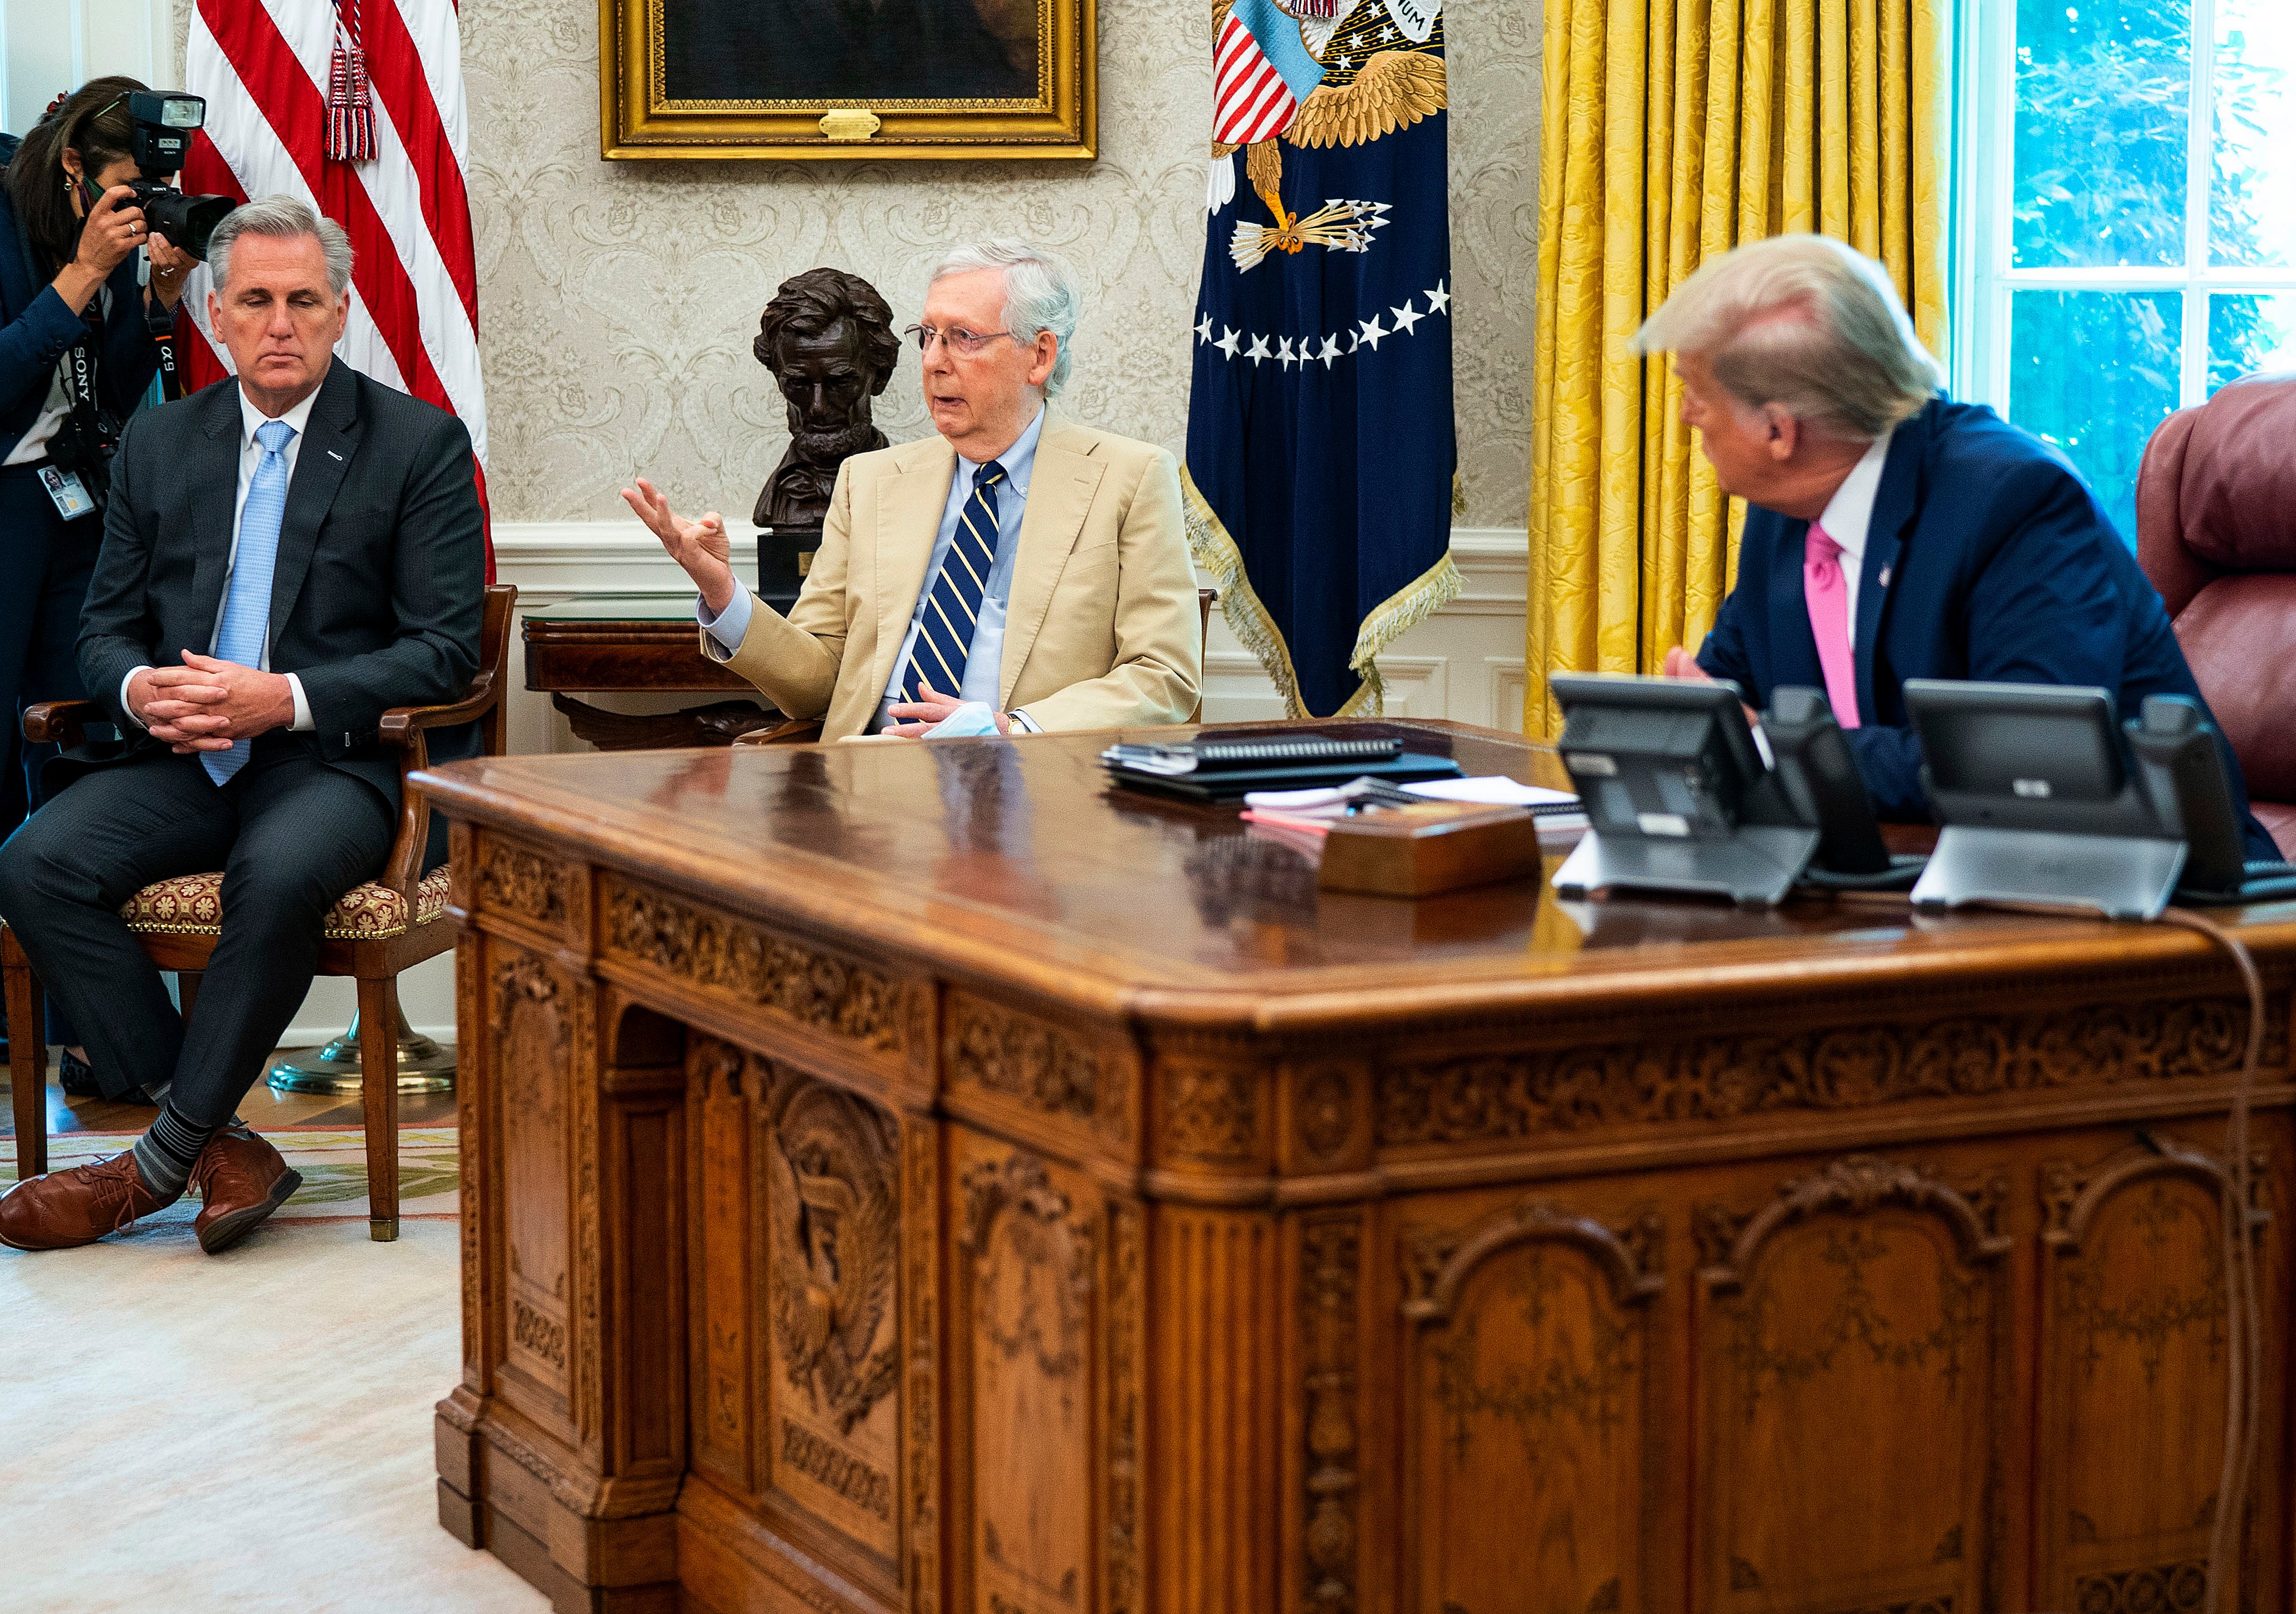 WASHINGTON, DC - JULY 20: U.S. President Donald Trump listens to Senate Majority Leader Mitch McConnell (R-KY) (C) during a meeting with cabinet members and House Minority Leader Kevin McCarthy (R-CA) (L) in the Oval Office at the White House July 20, 2020 in Washington, DC. Trump and the congressional leaders talked about a proposed new round of financial stimulus to help the economy during the ongoing global coronavirus pandemic. (Photo by Doug Mills/Getty Images)